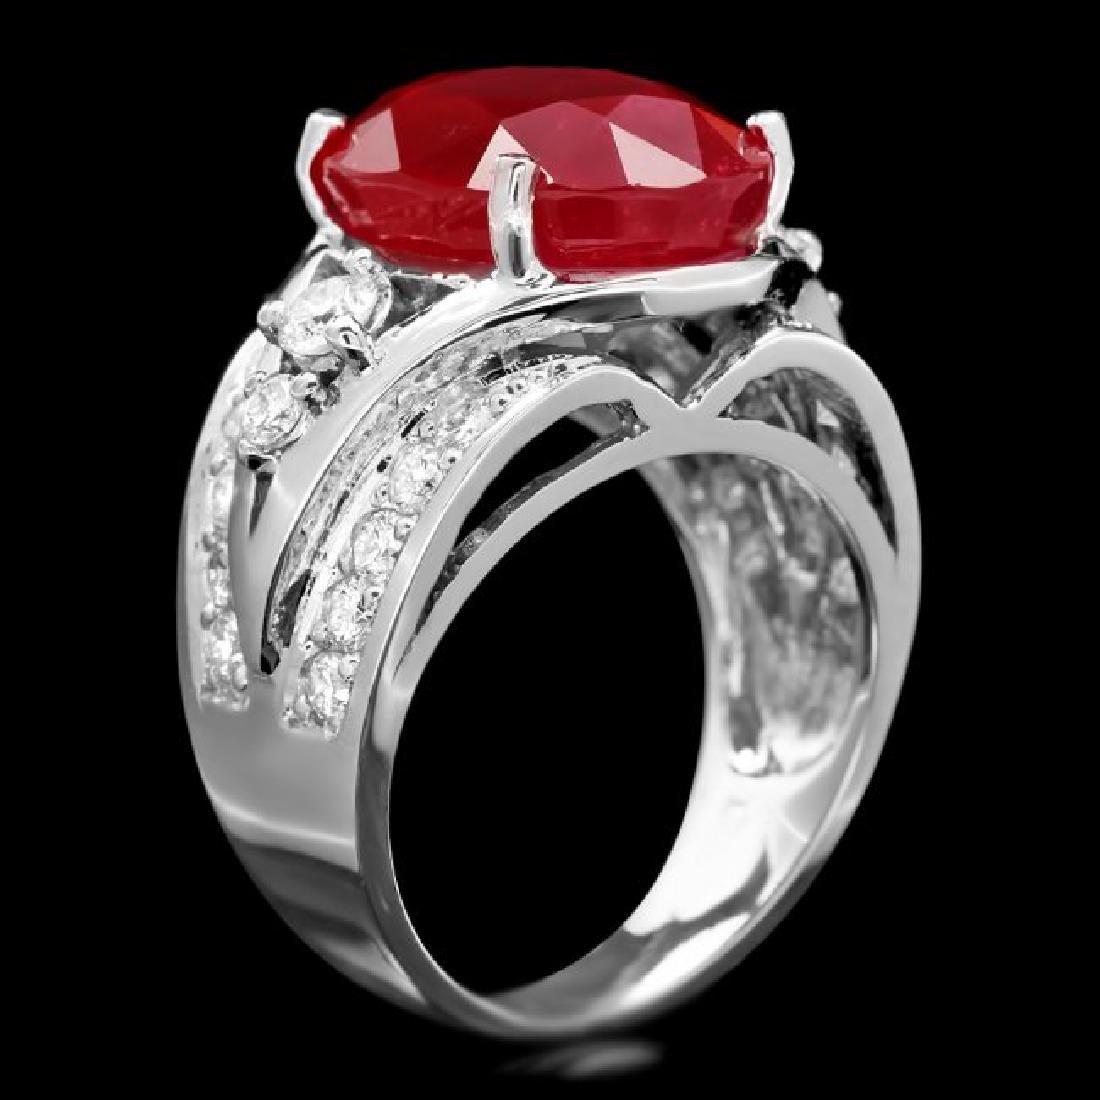 14K White Gold 12.27ct Ruby and 1.32ct Diamond Ring